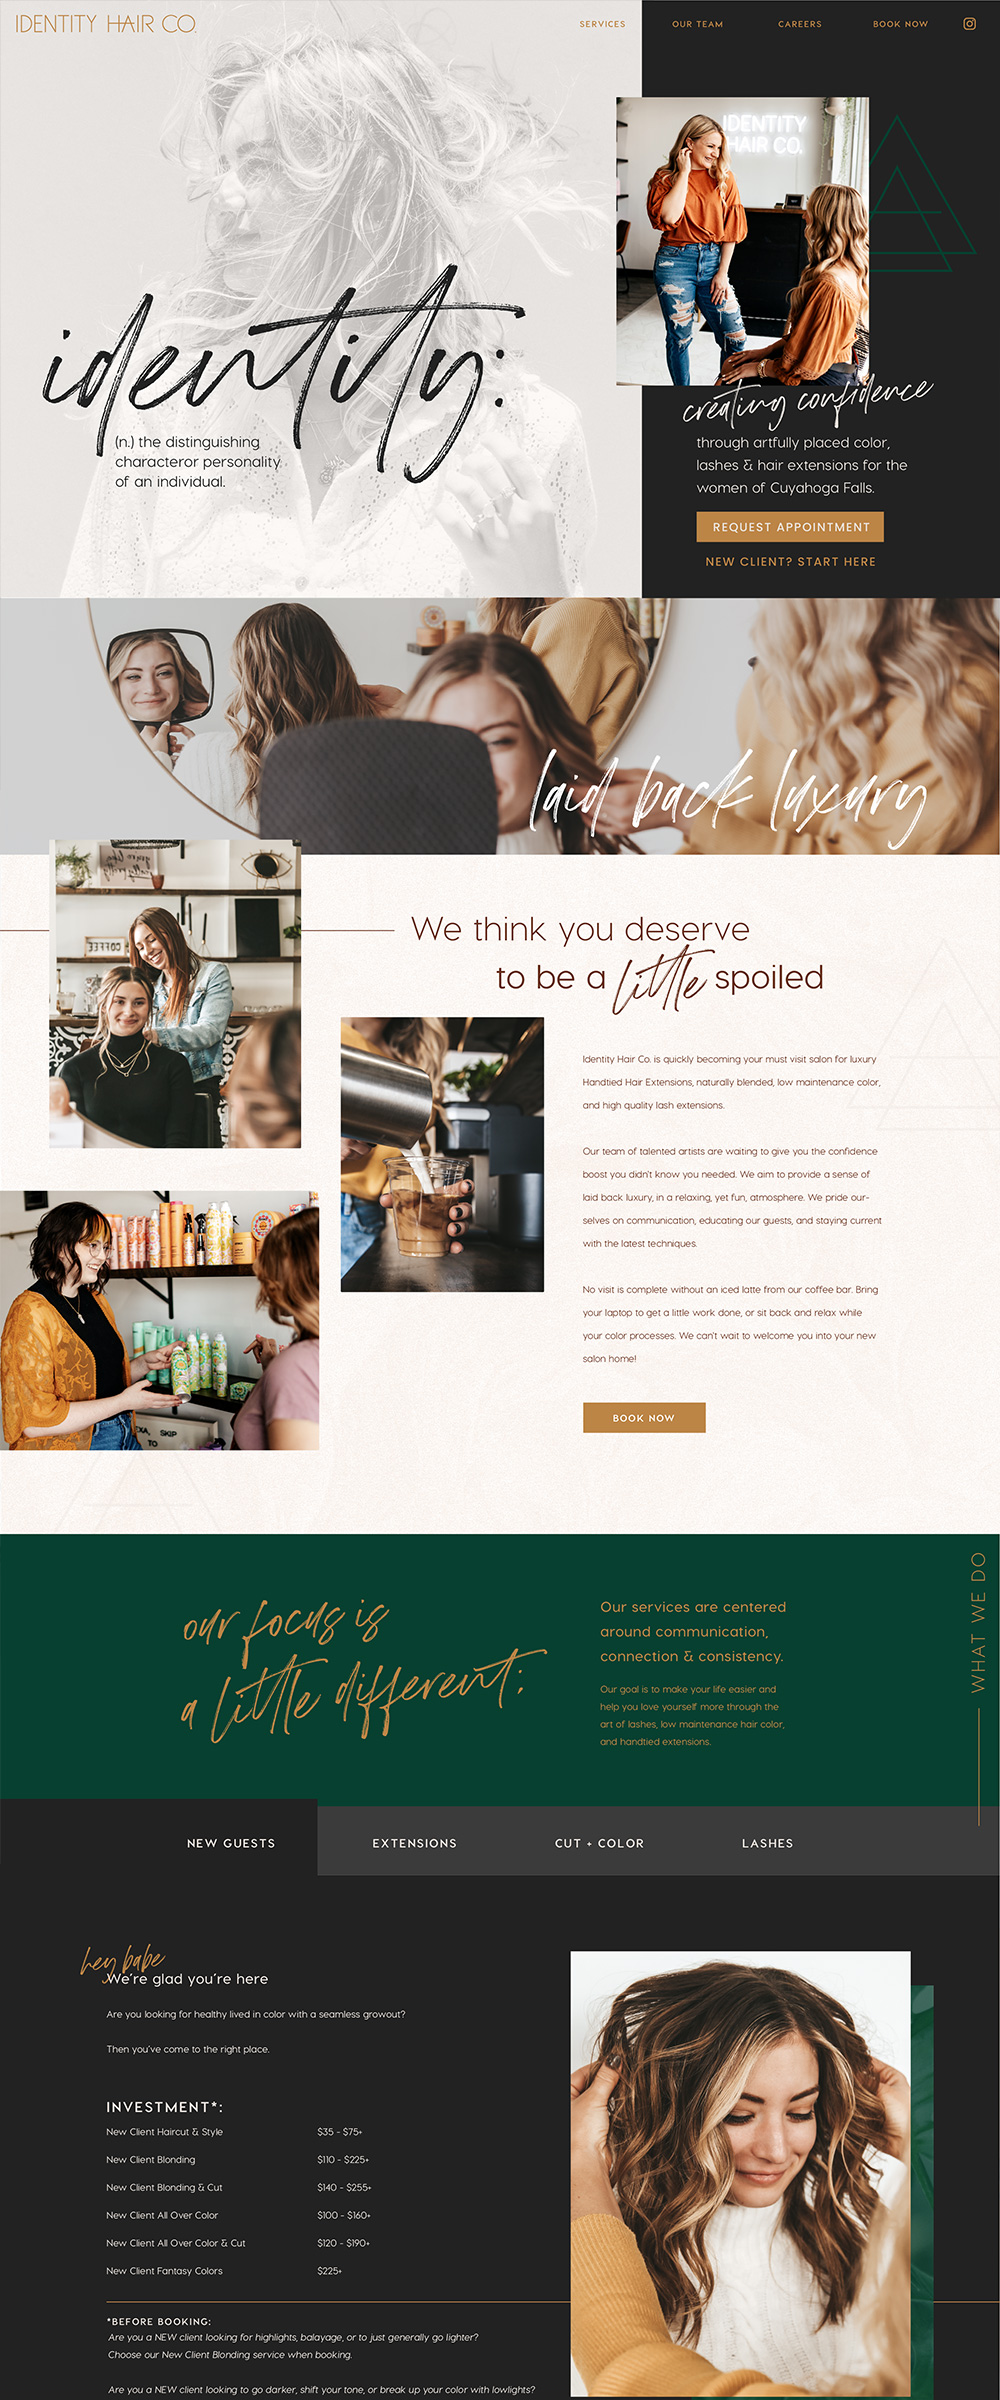 Showit Website Design for Salons | Identity Hair Co - by Hey Hello Studio